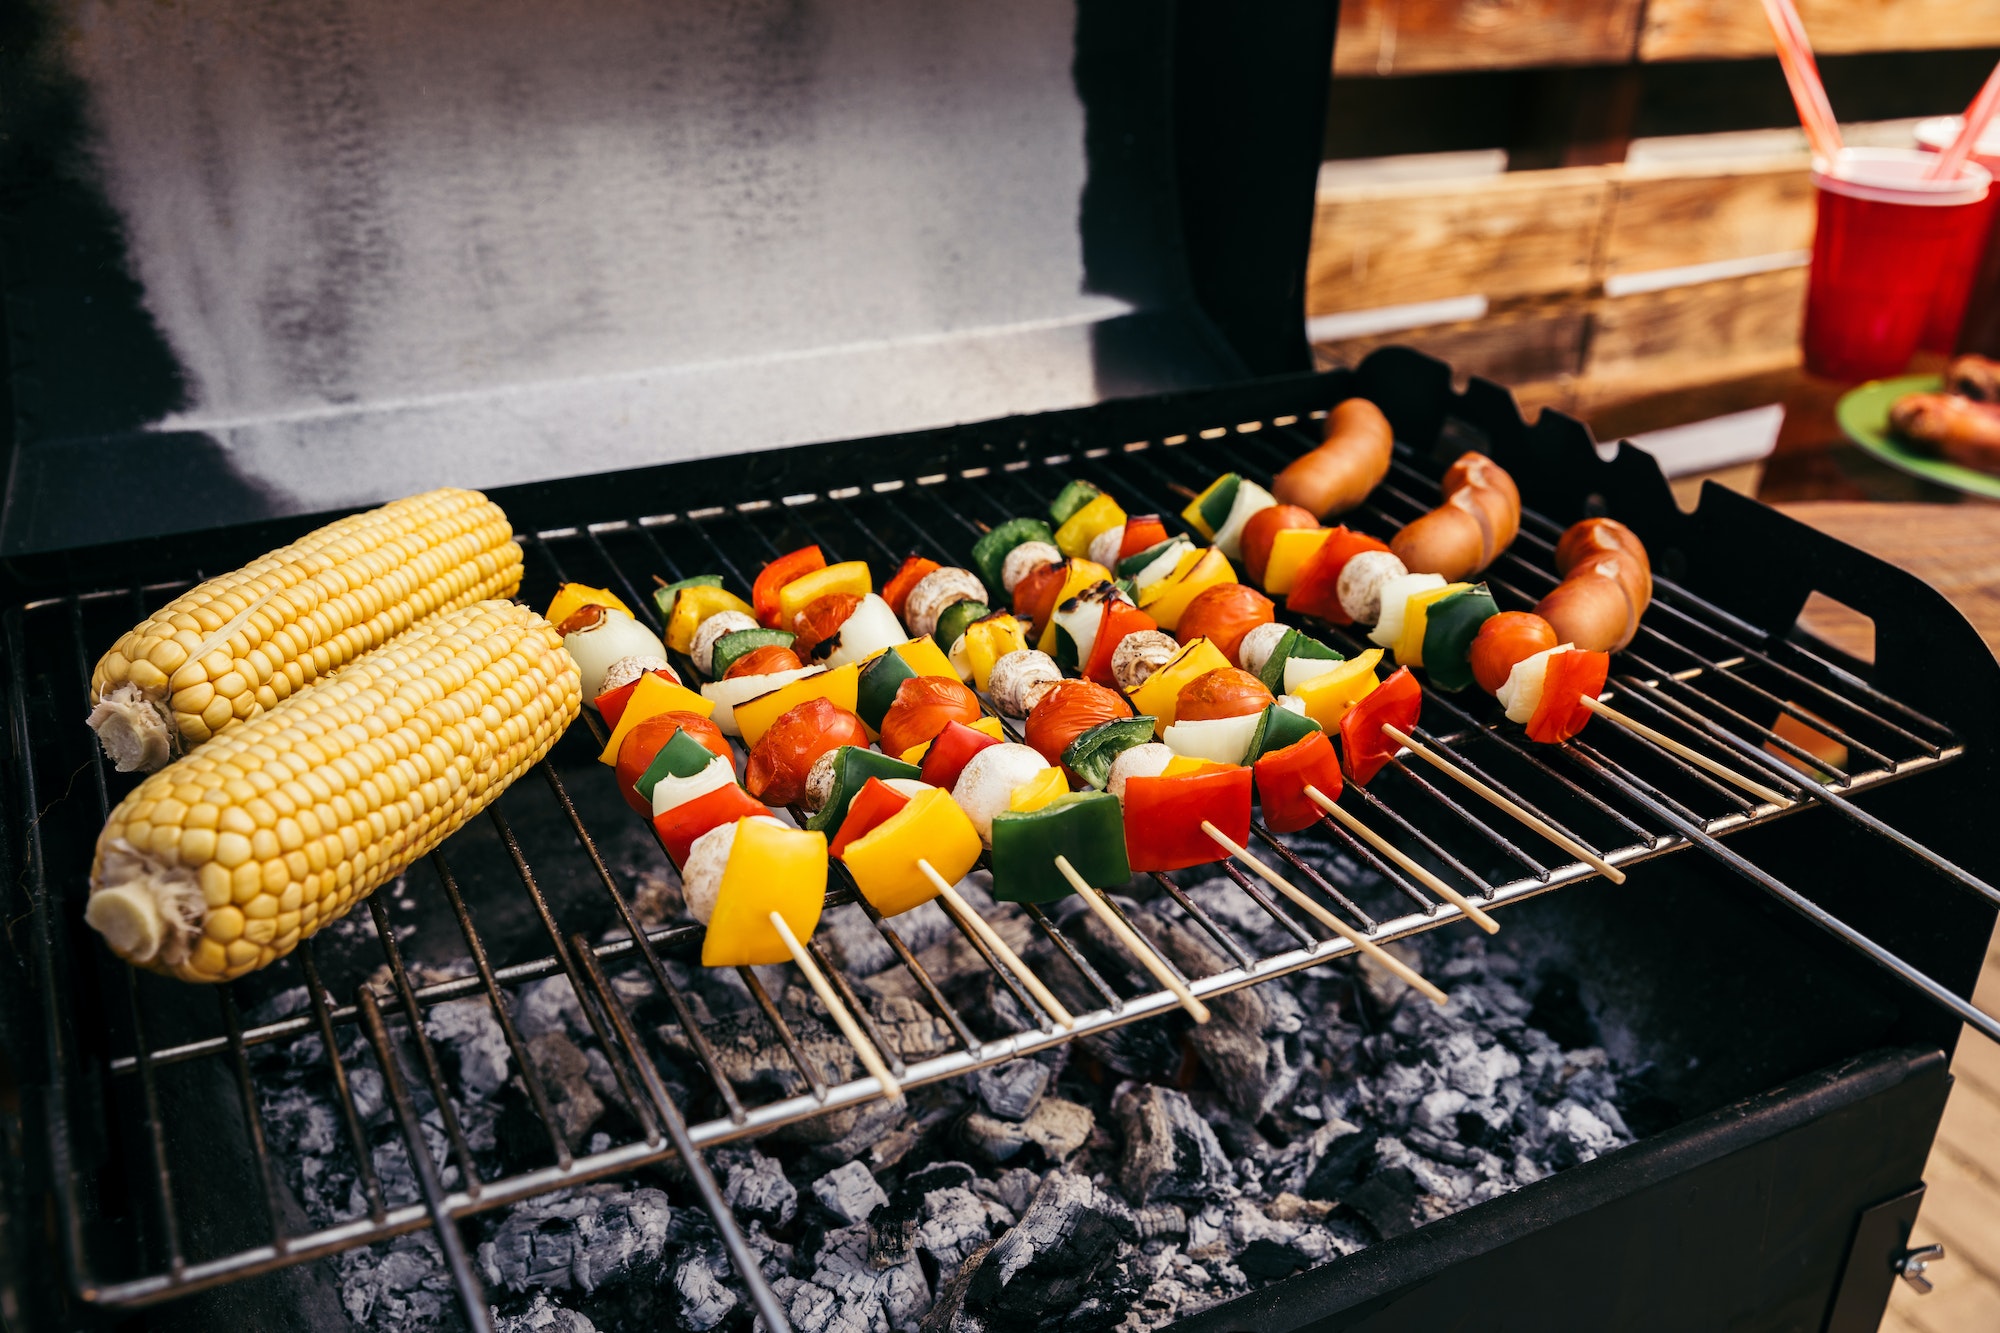 Corn and vegetables grilled for outdoors barbecue with sausages